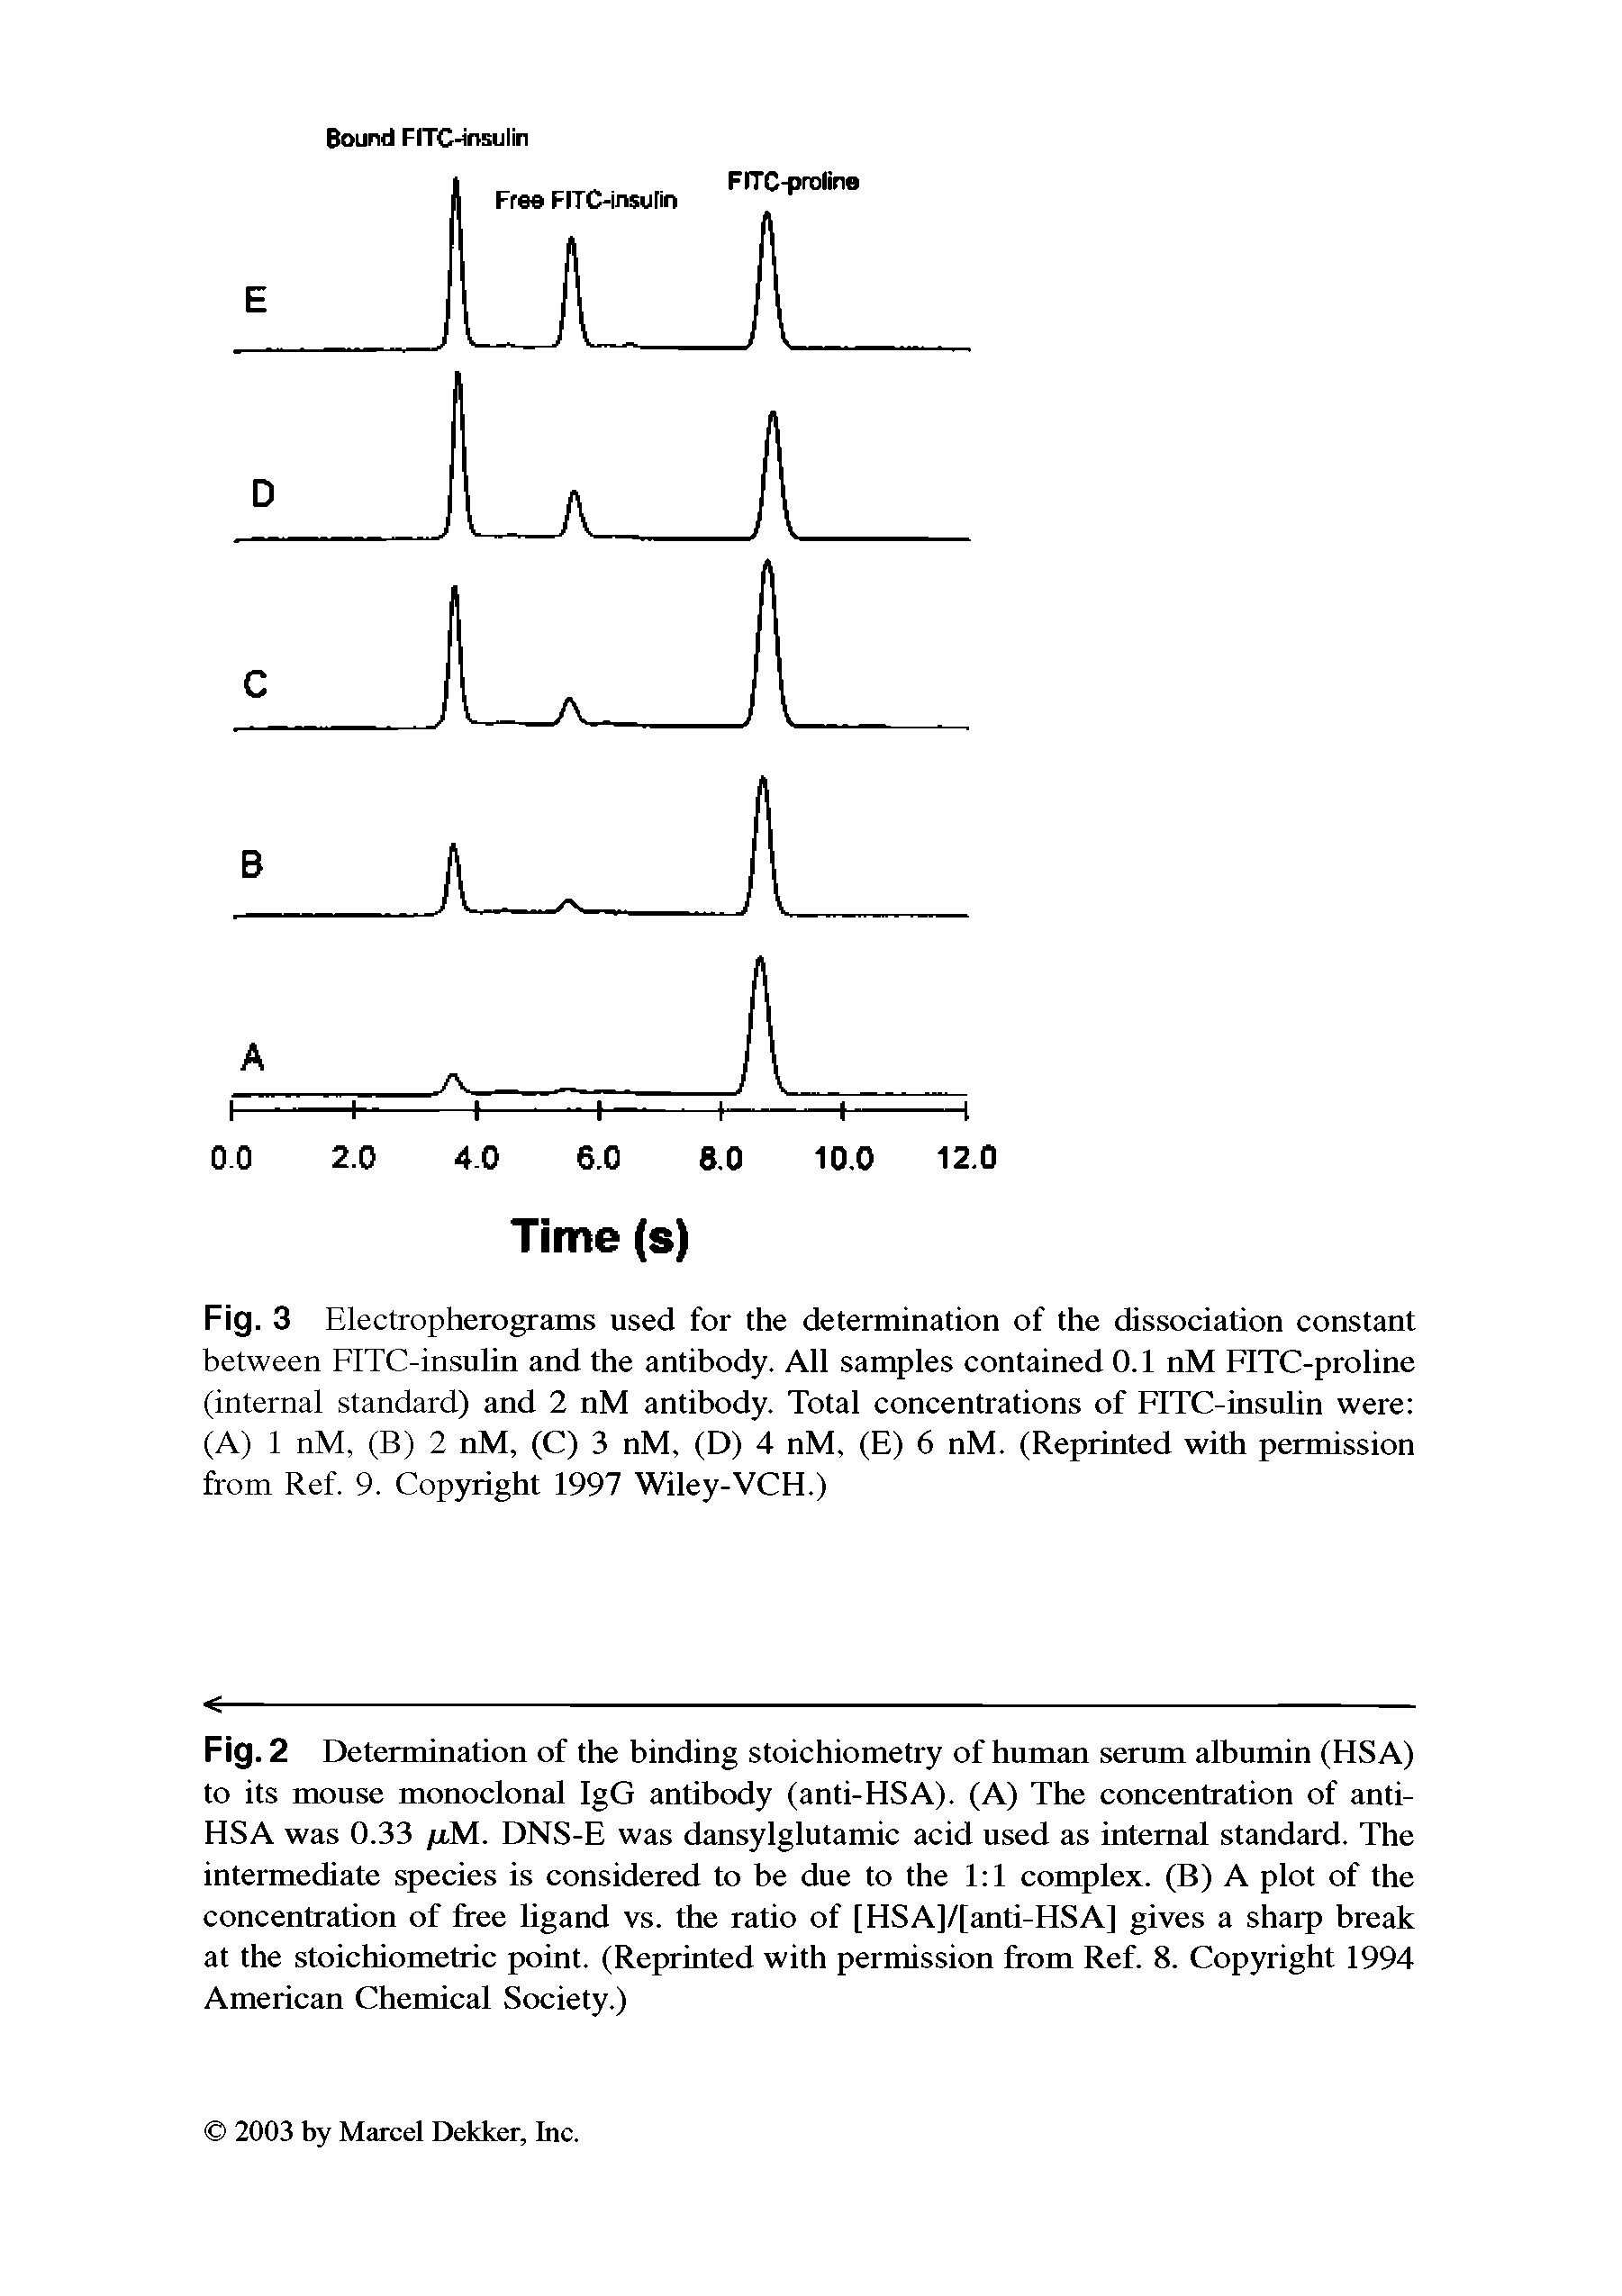 Fig. 3 Electropherograms used for the determination of the dissociation constant between FITC-insulin and the antibody. All samples contained 0.1 nM FITC-proline (internal standard) and 2 nM antibody. Total concentrations of FITC-insulin were (A) 1 nM, (B) 2 nM, (C) 3 nM, (D) 4 nM, (E) 6 nM. (Reprinted with permission from Ref. 9. Copyright 1997 Wiley-VCH.)...